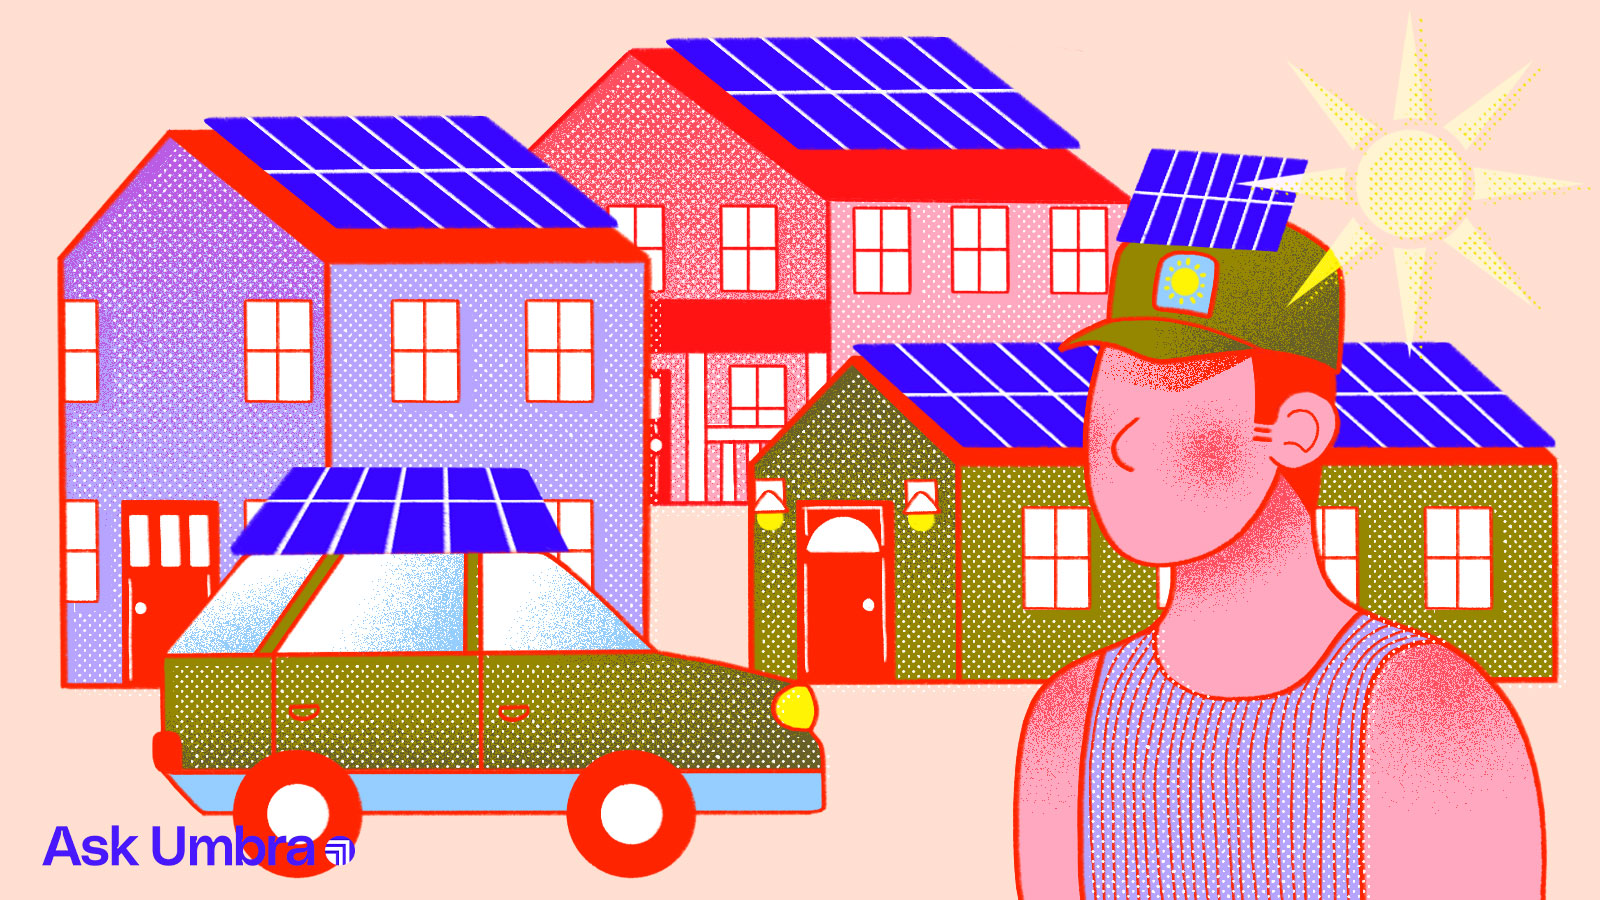 Illustration: Solar panels on top of houses, a car, and a person's hat